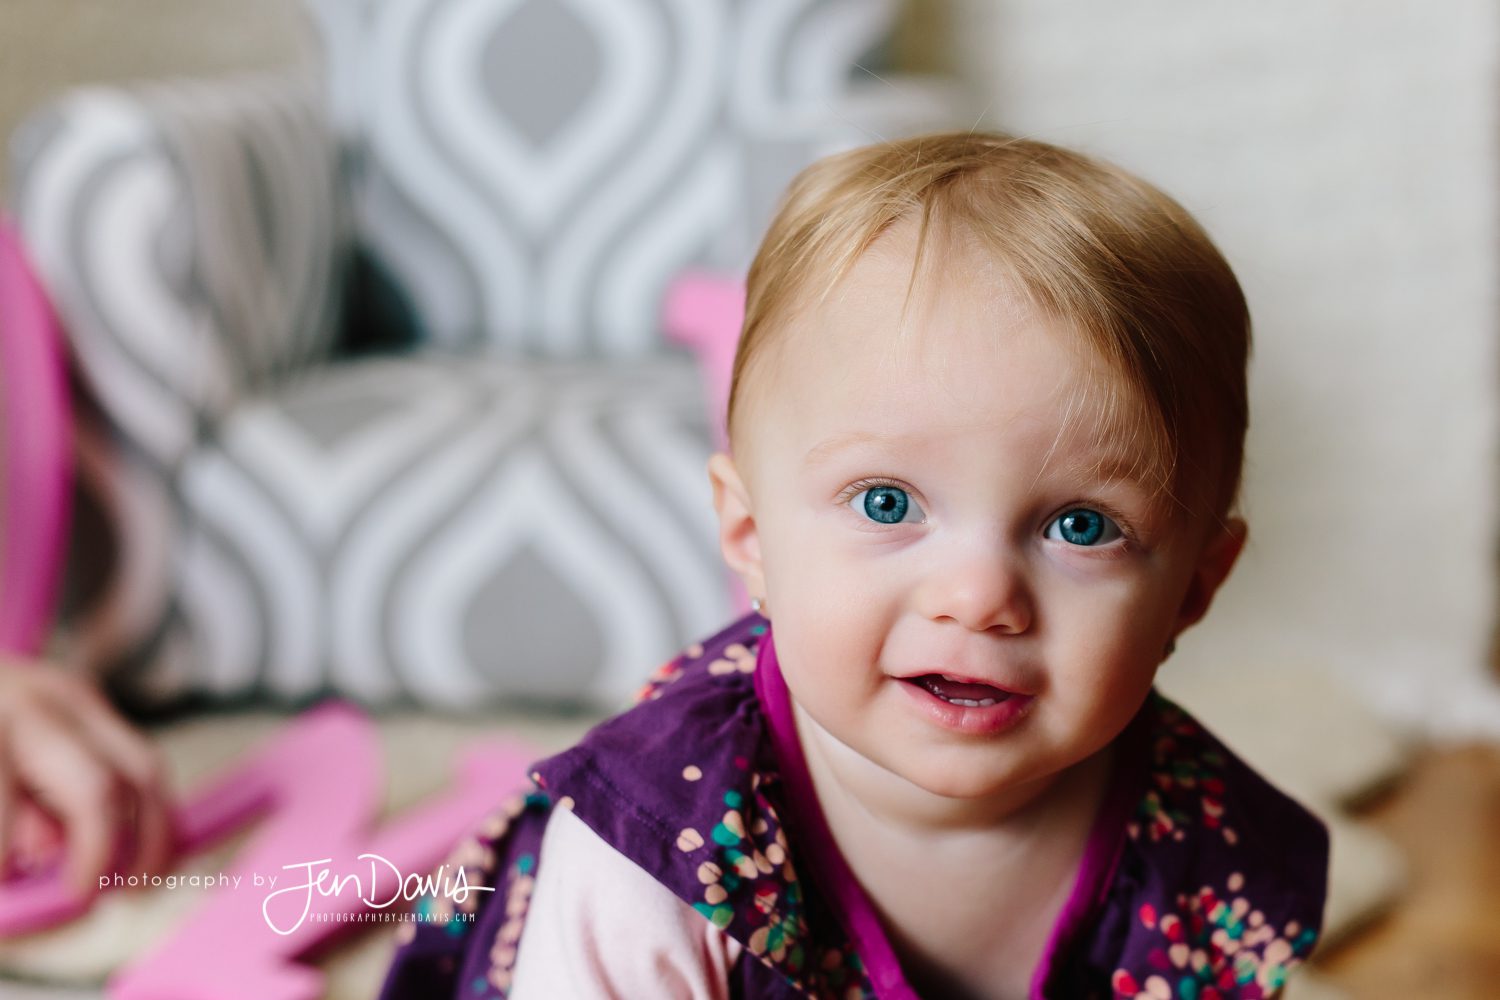 One year old girl with blonde hair and blue eyes